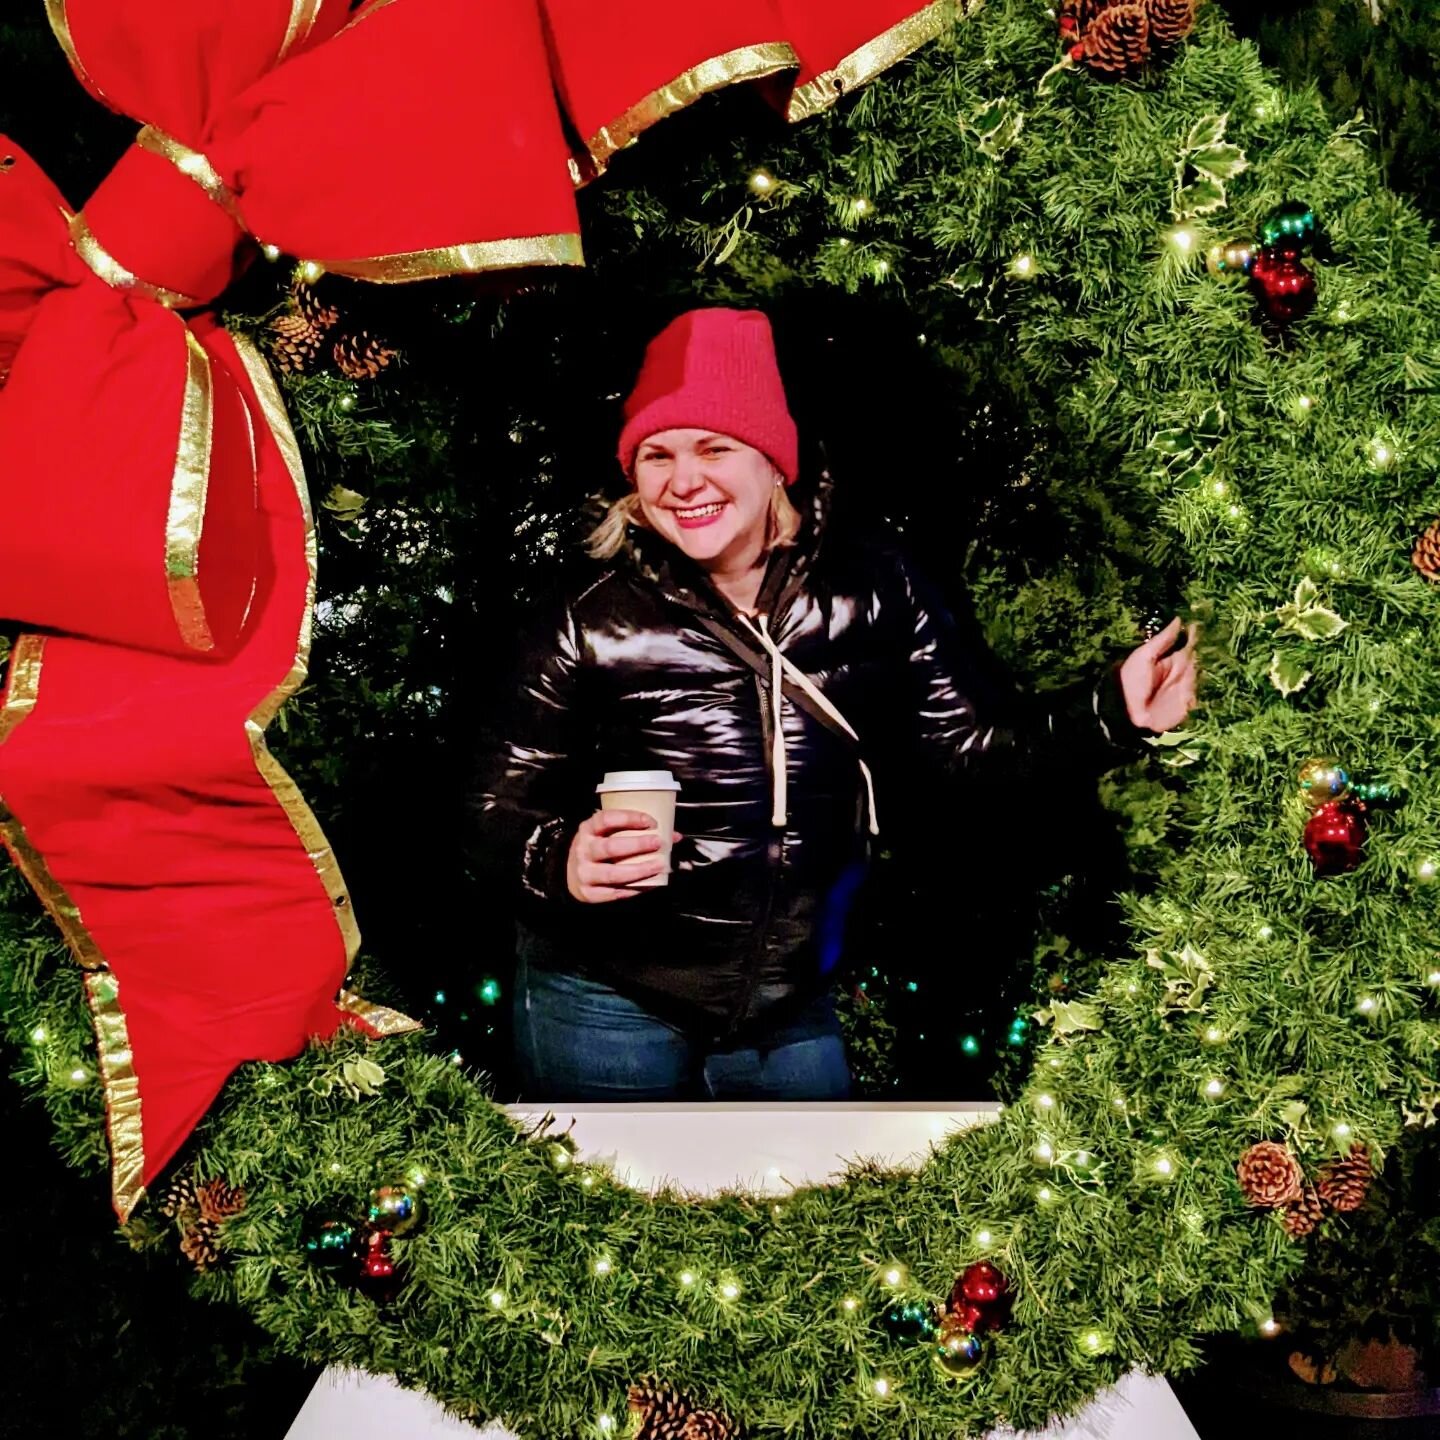 Happy December! Went to the light up/opening night of Christmas lights at @thebutchartgardens last night. We didn't let the wind or frost stop us from having an awesome night. Swipe ➡️ to see some of my faves that I took + keep an 👀 out for some ree